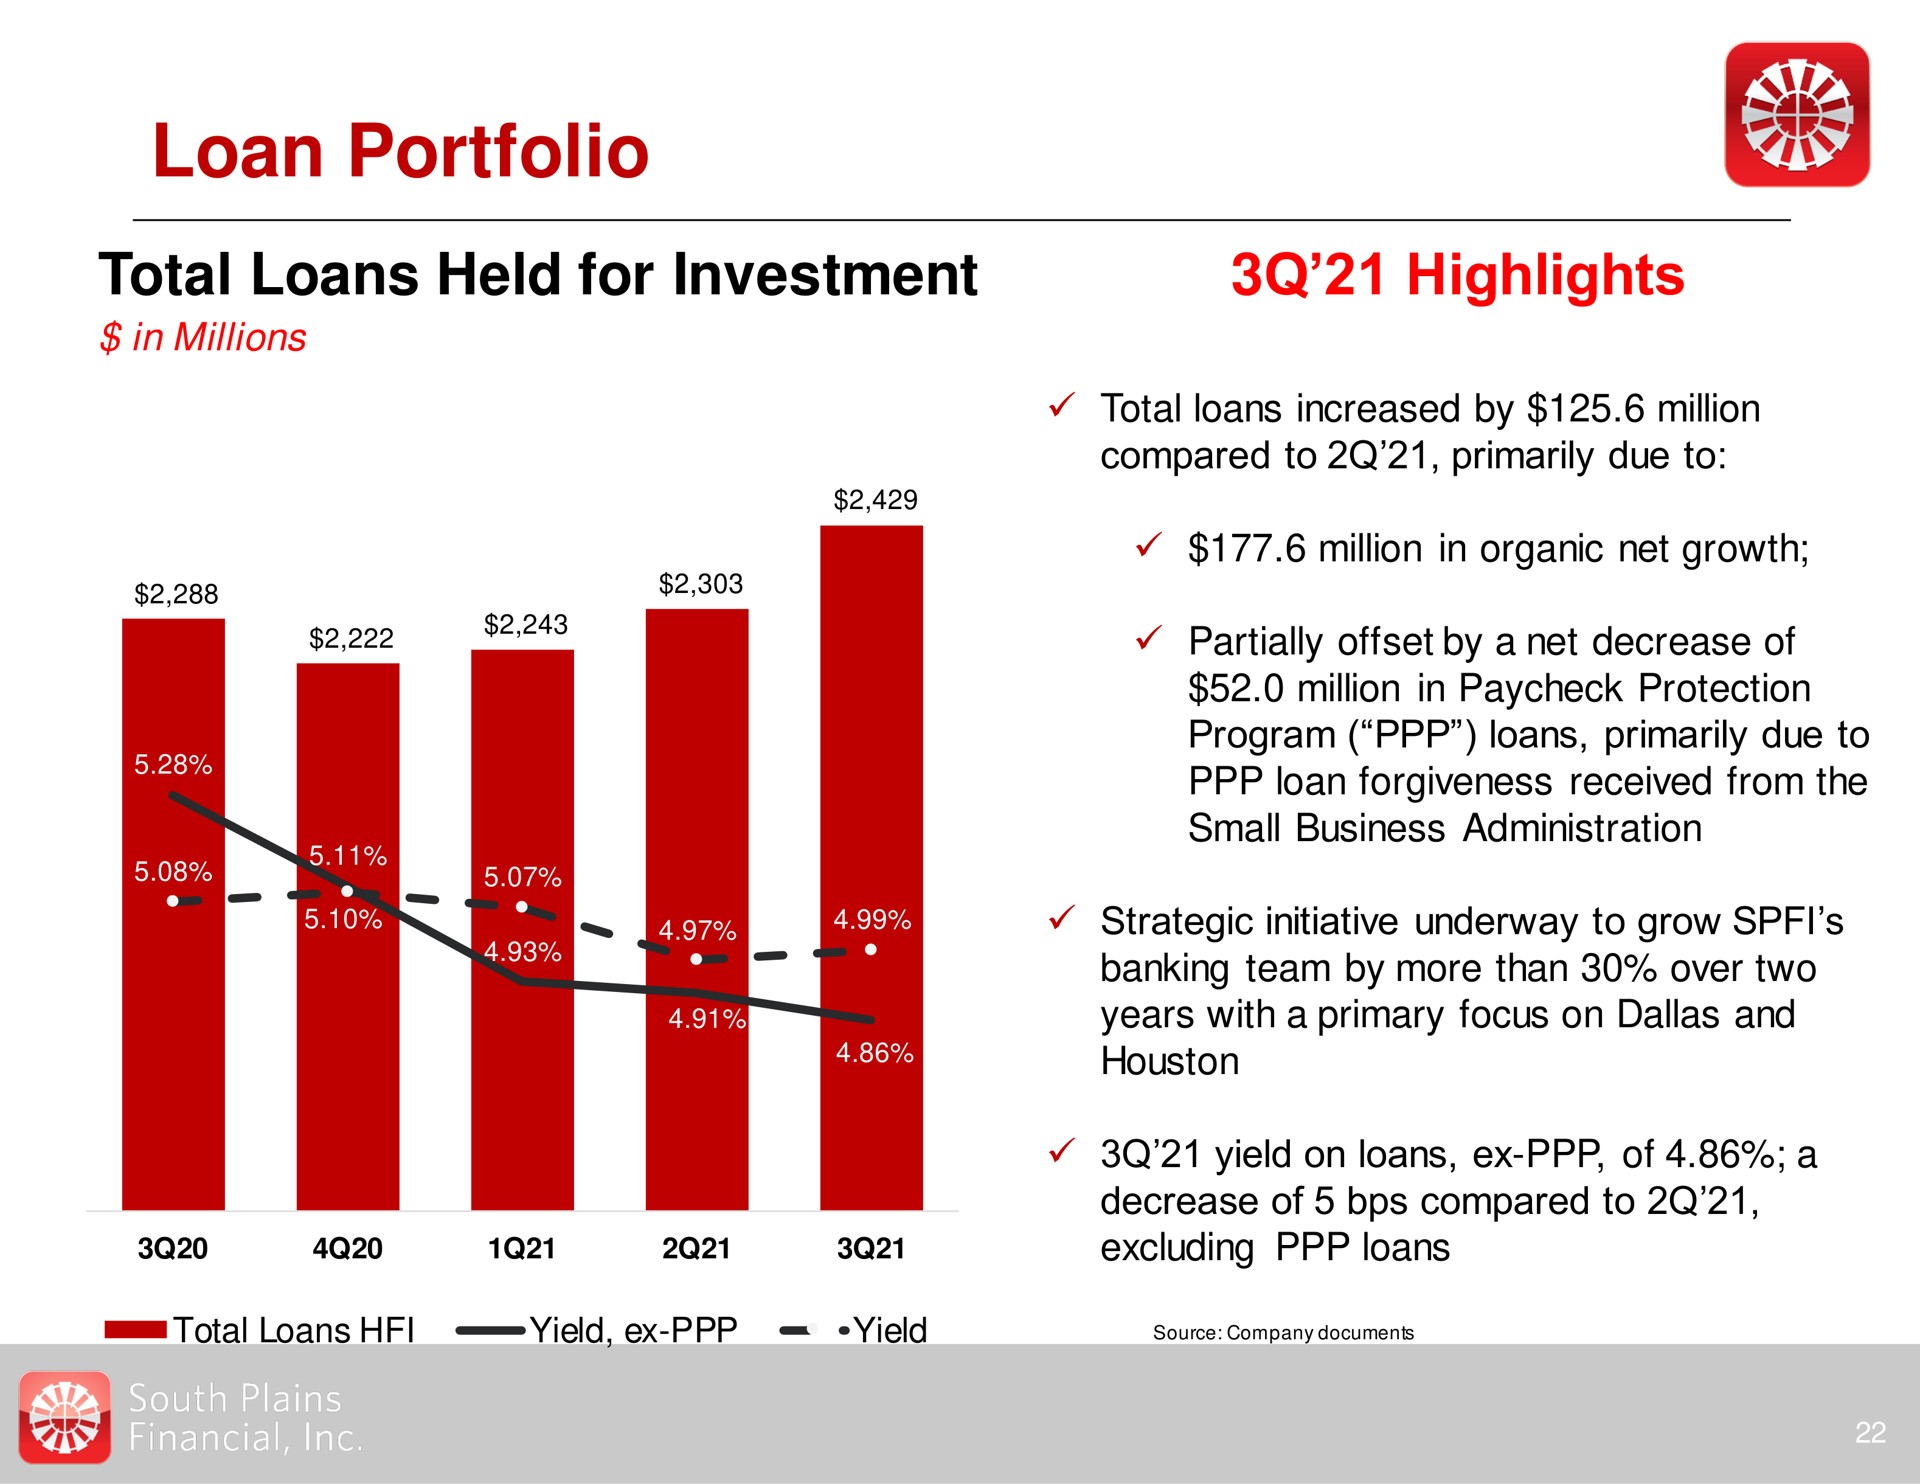 loan portfolio total loans held for investment highlights | South Plains Financial